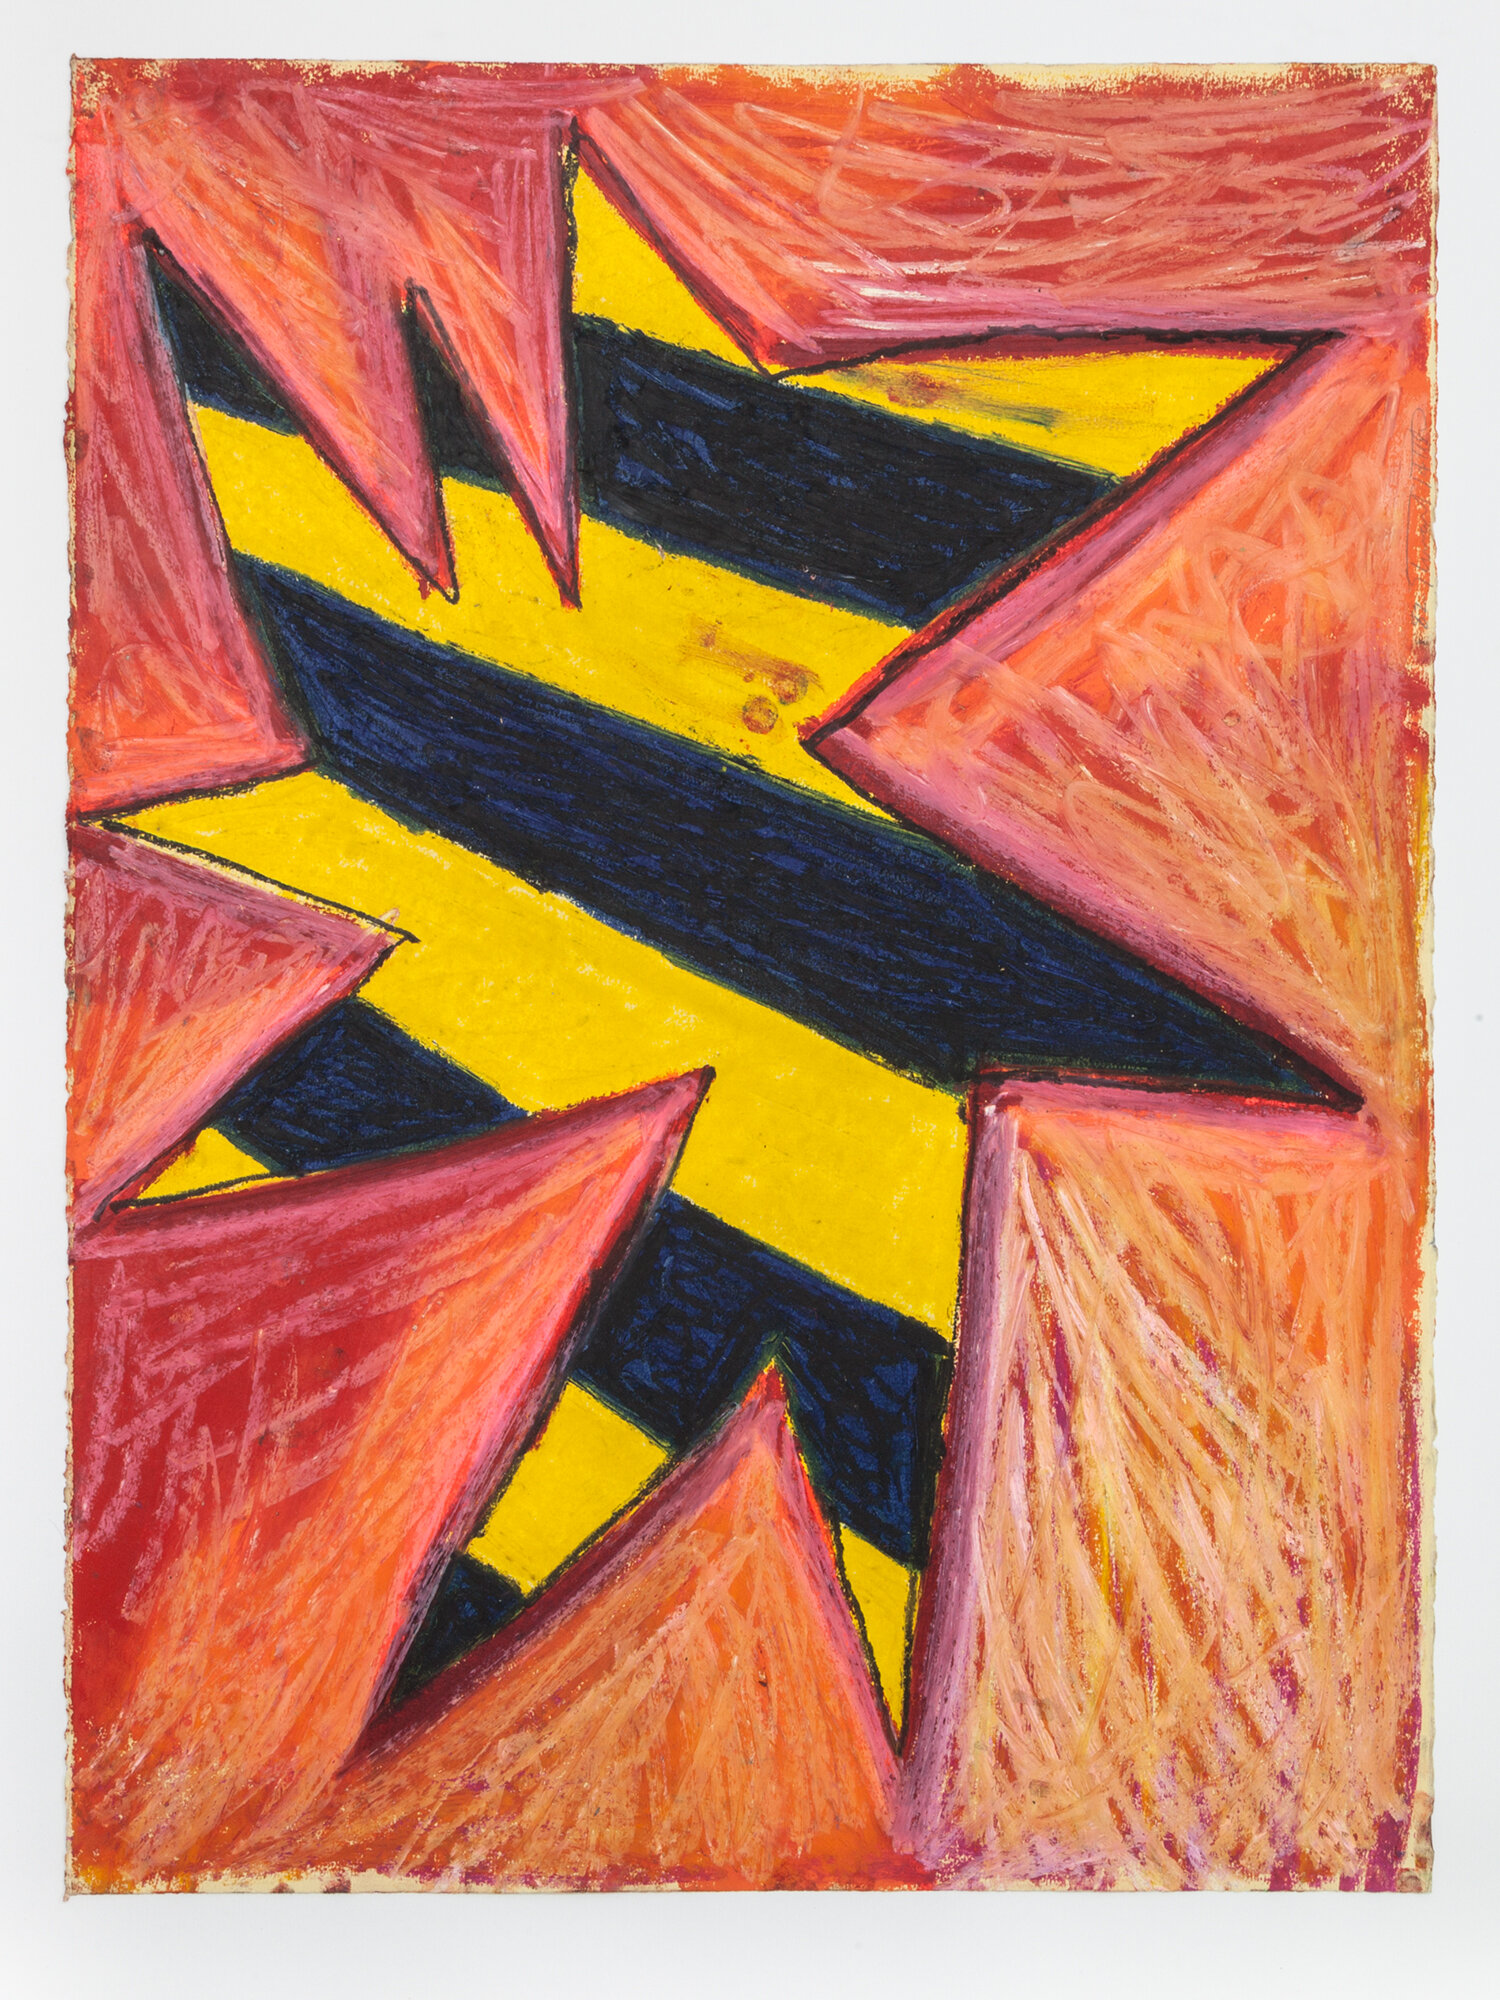  Stewart Hitch,  Untitled , 1982, Oil stick on paper 30 x 22 inches 